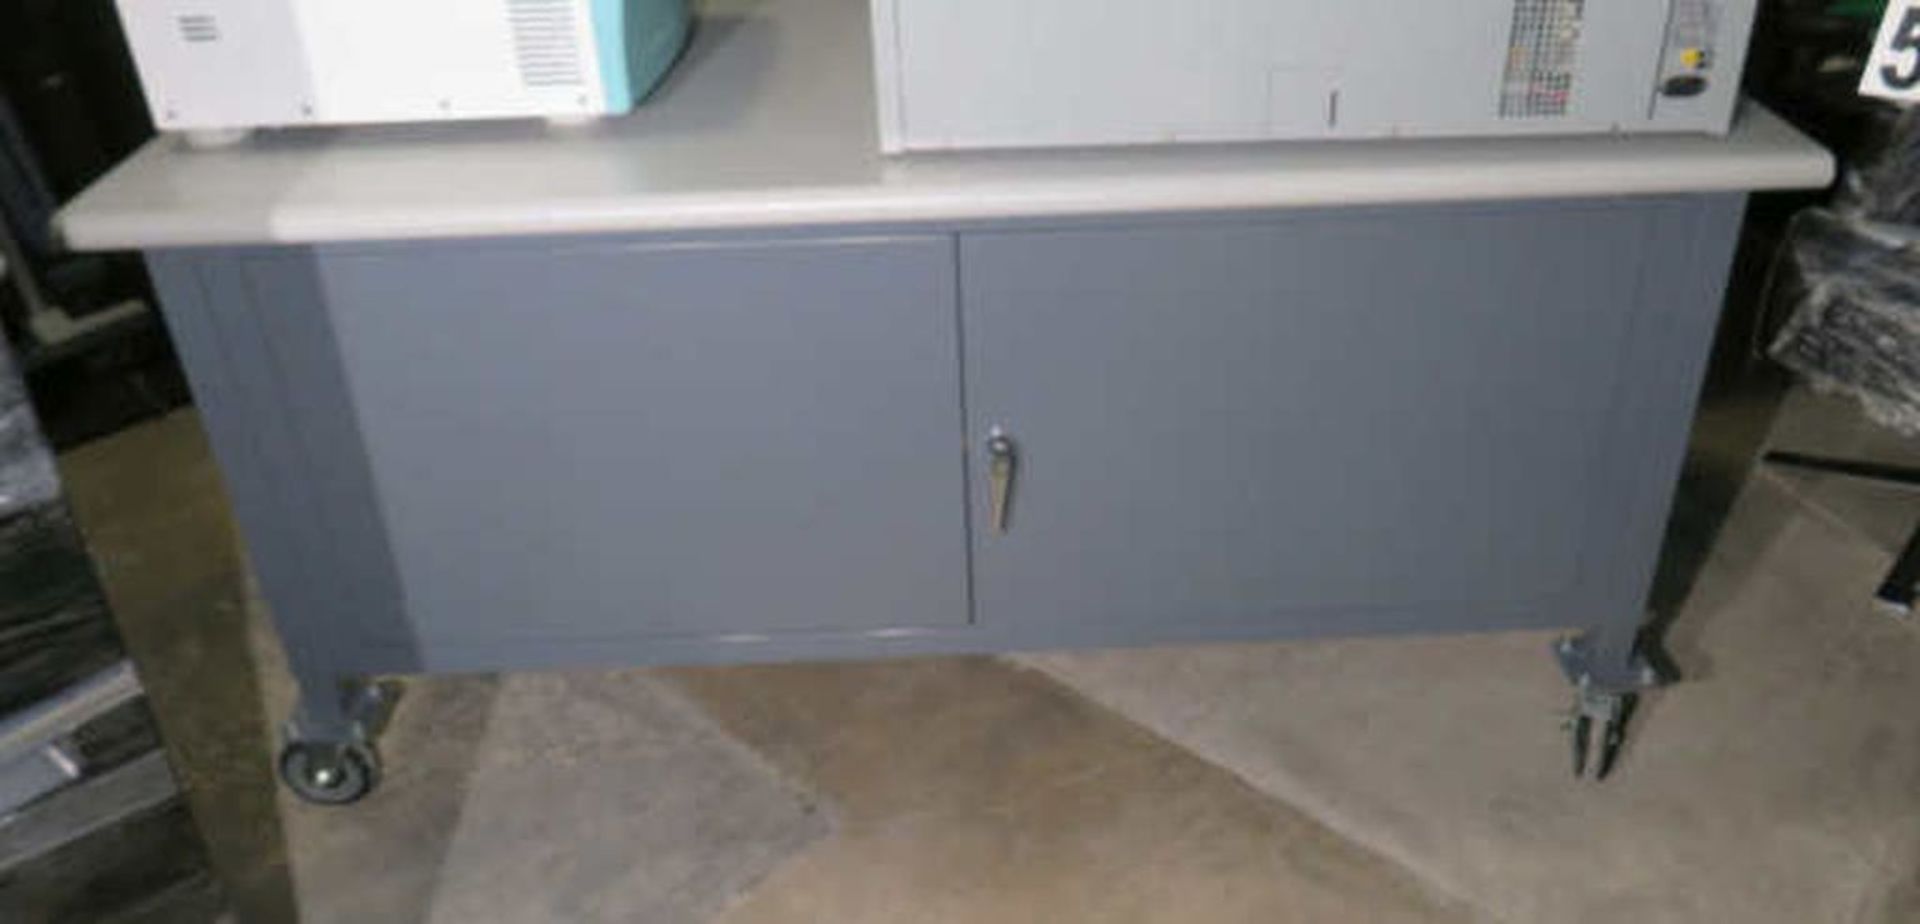 Steel Industrial Cabinet on Casters, 72”l x 30”w x 37”H